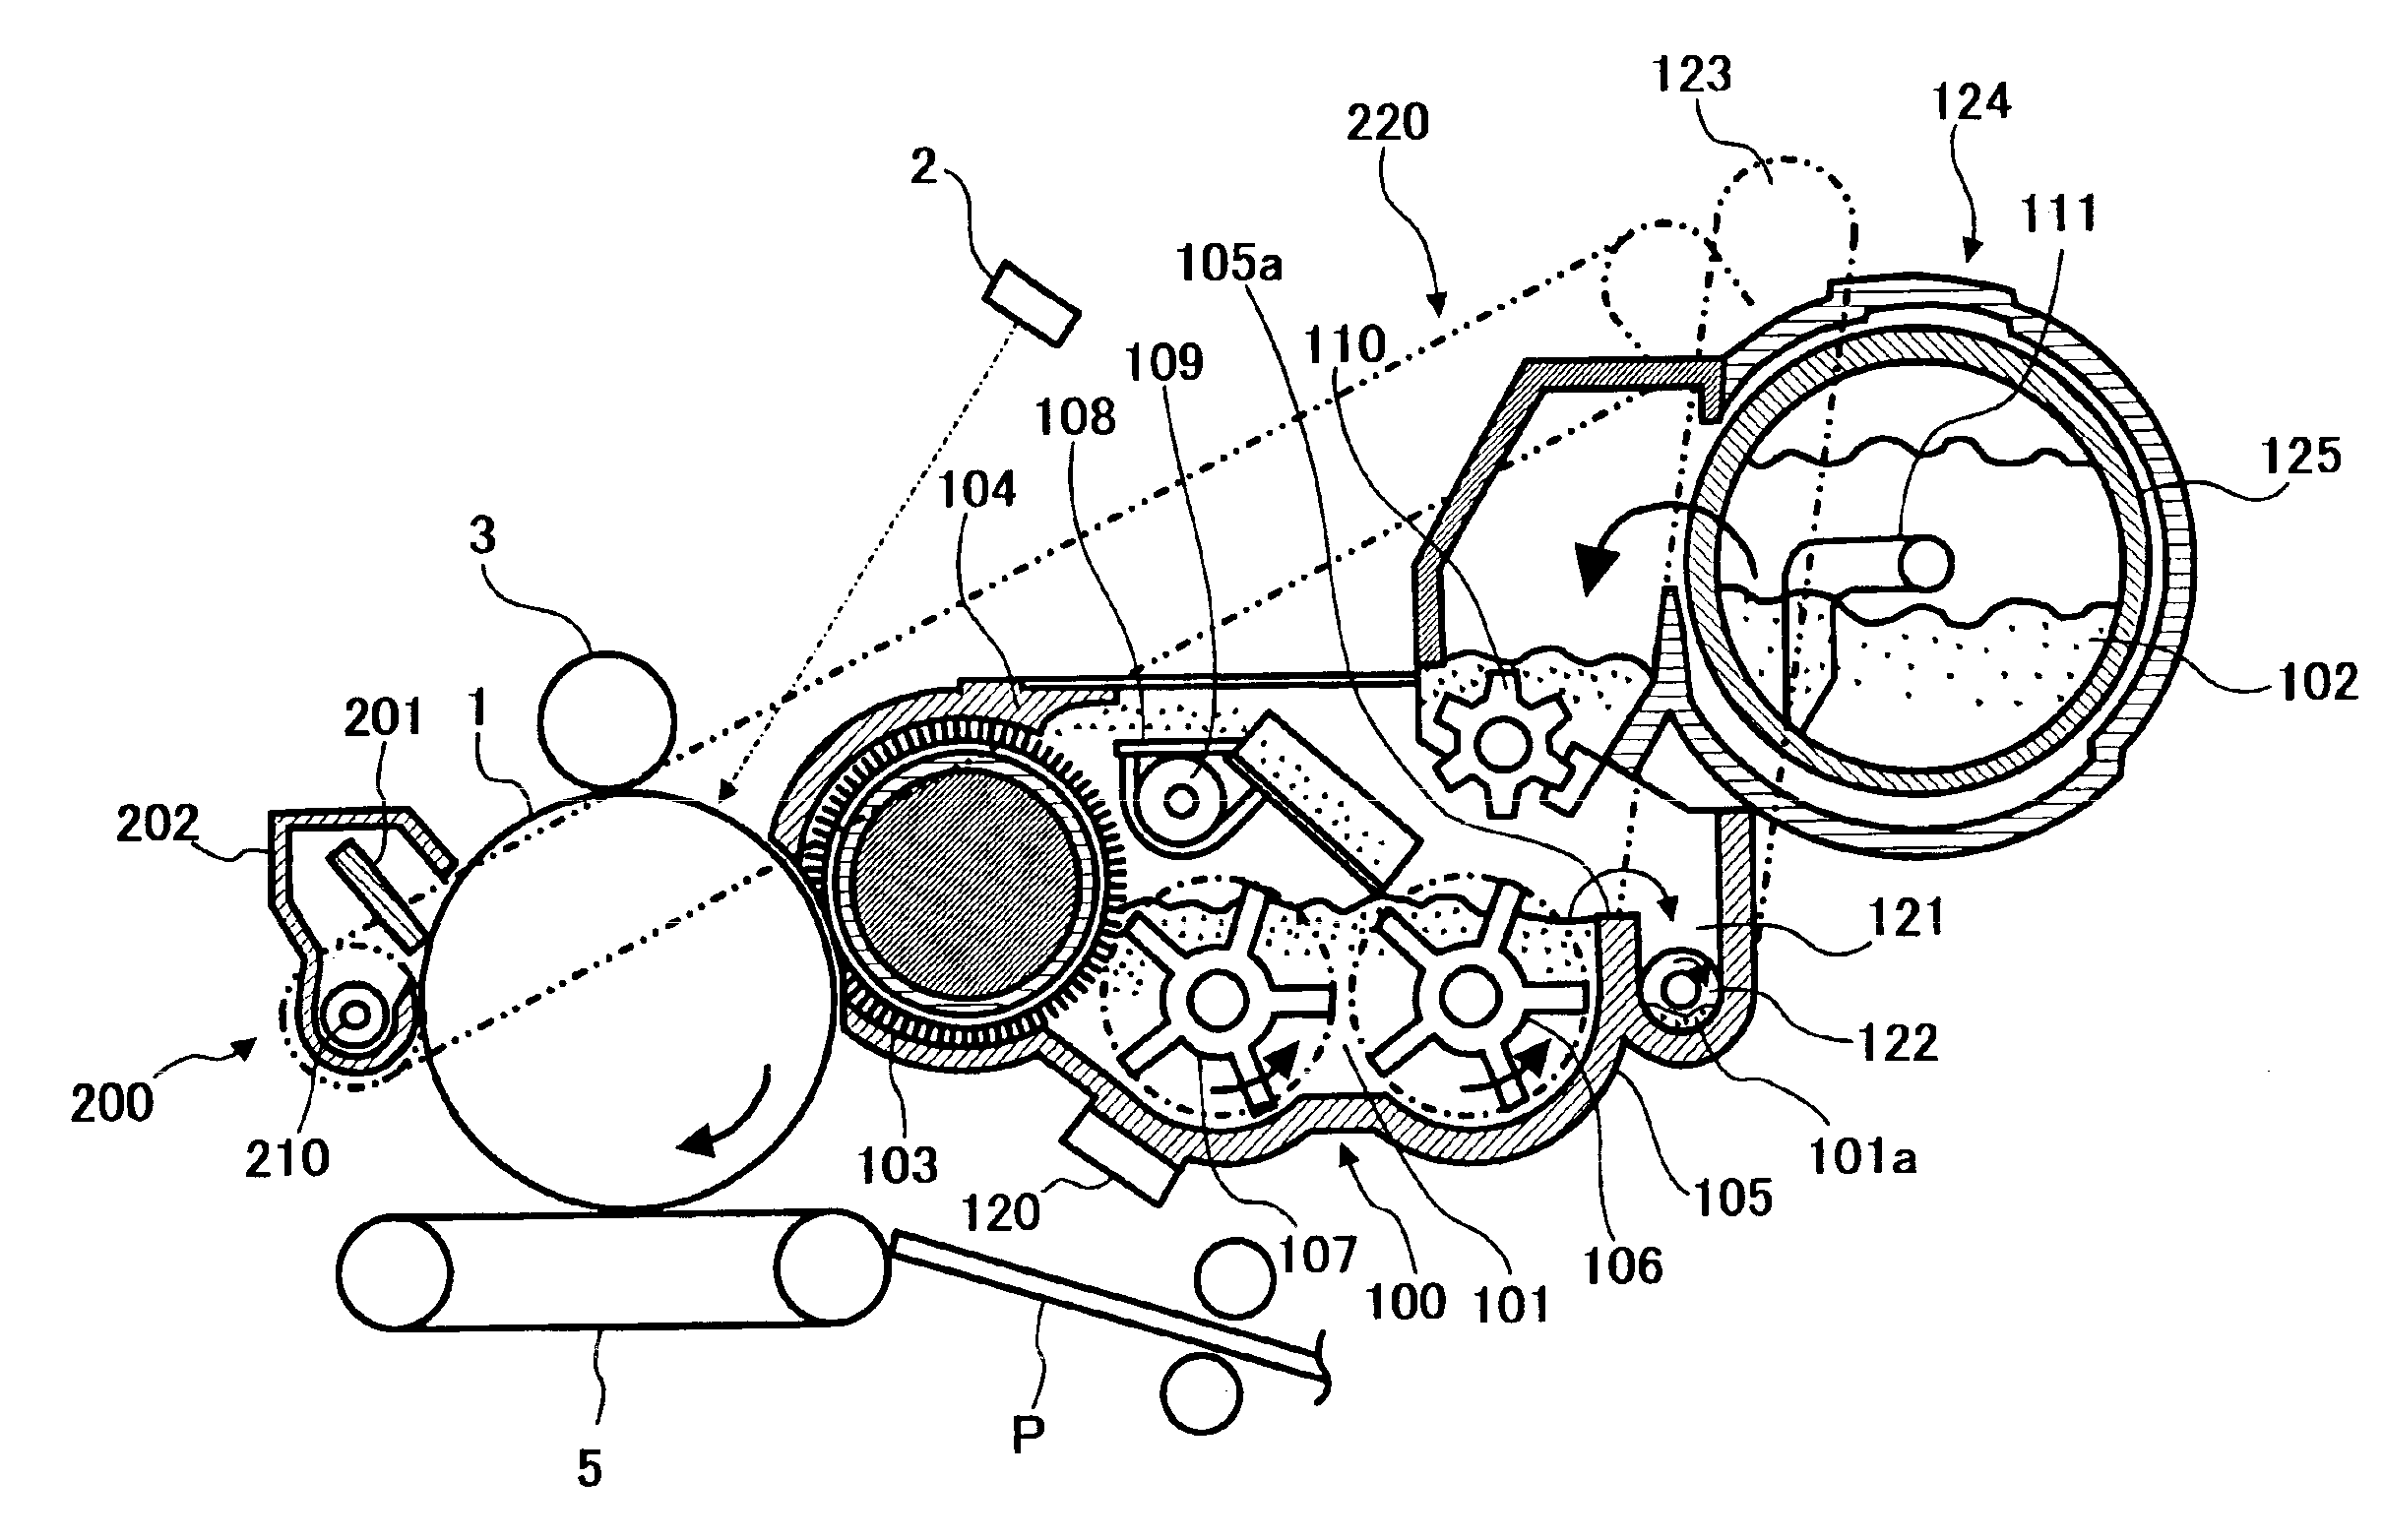 Image forming apparatus including developing device and developer containing device